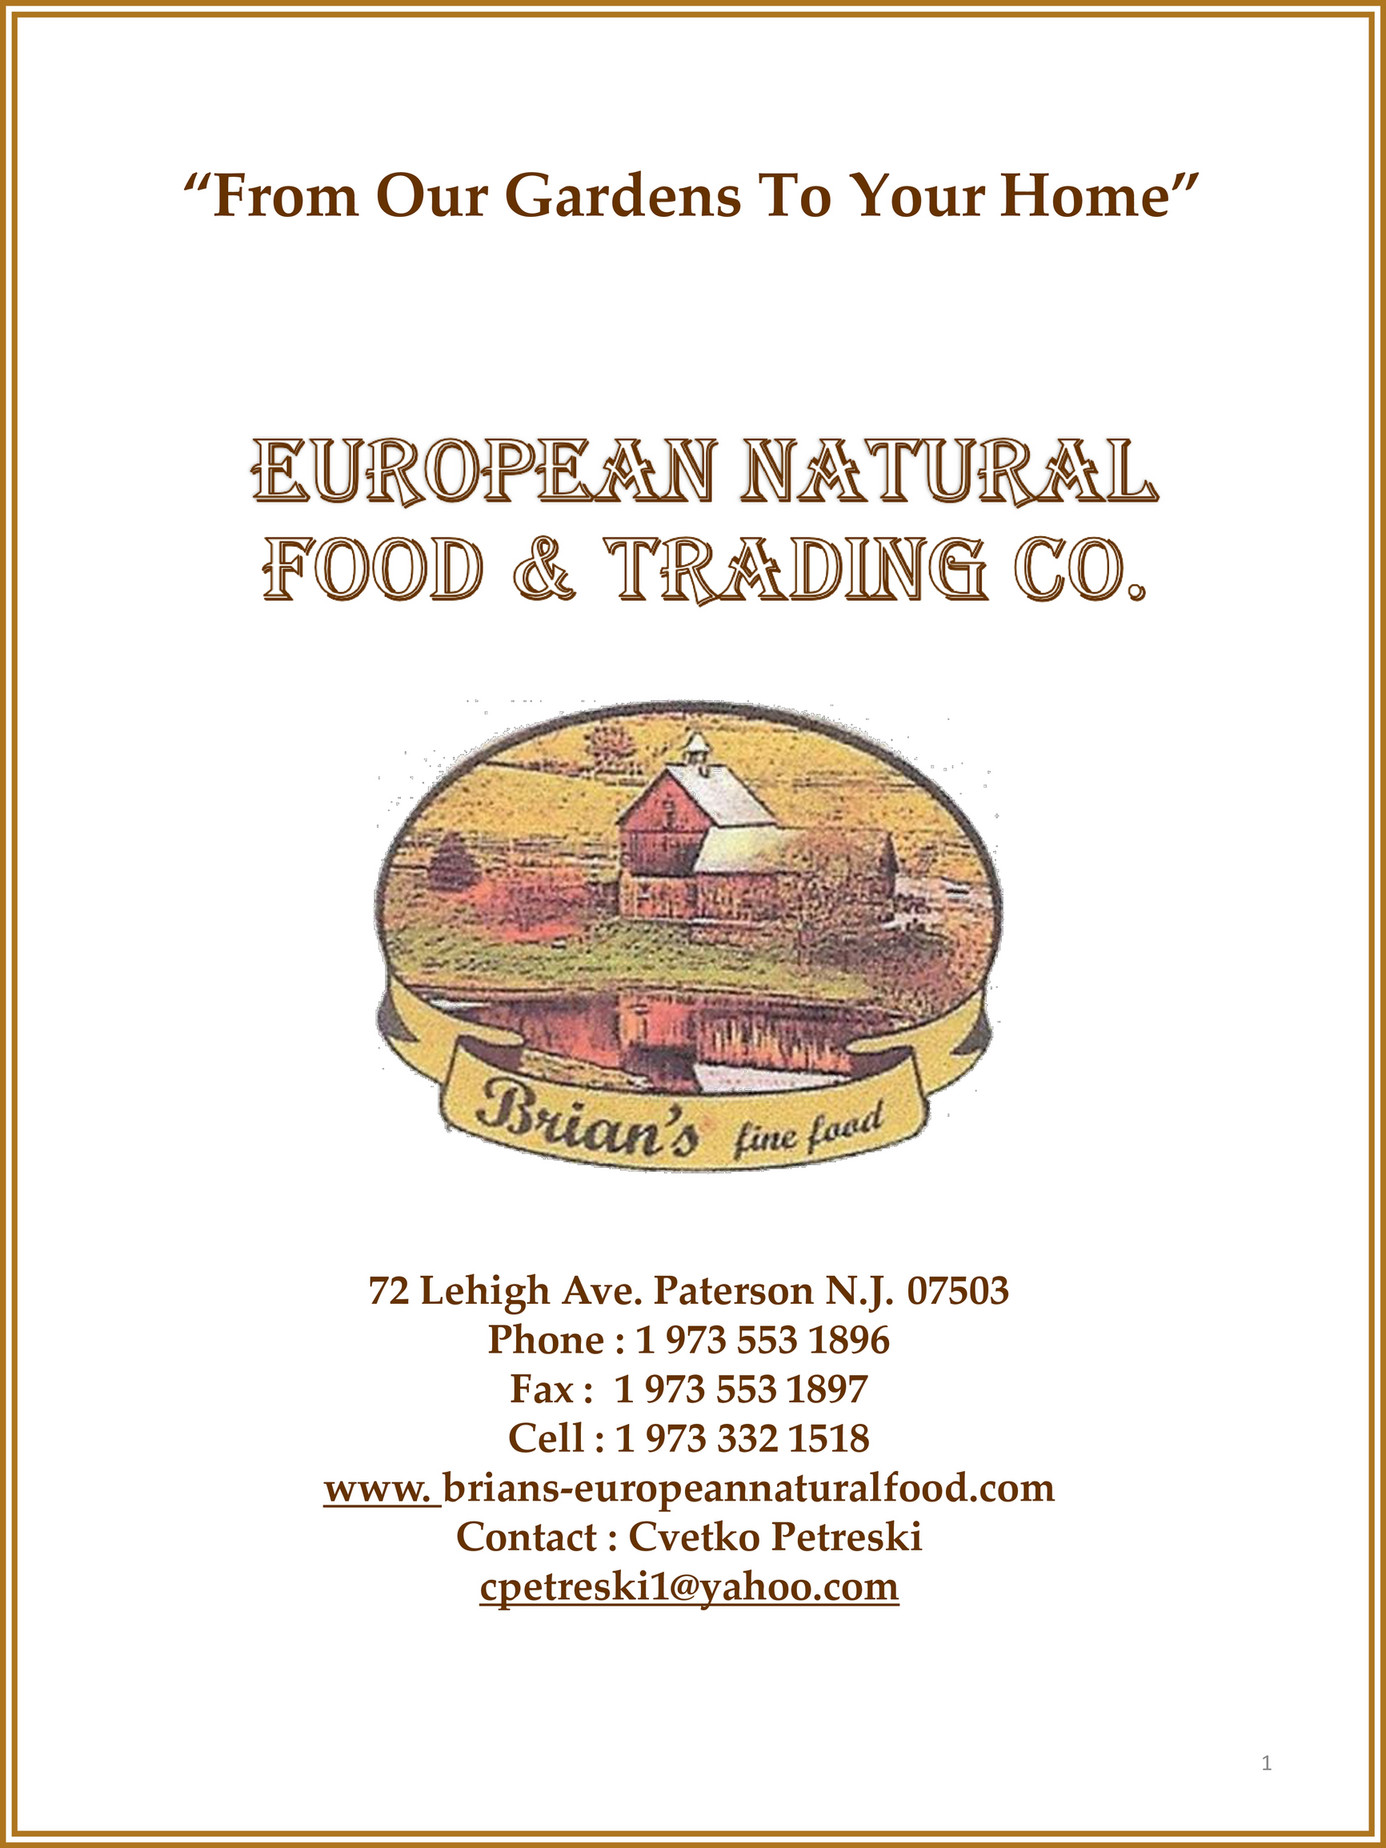 European Natural Food - Catalog 2021 - Page 1 - Created with Publitas.com